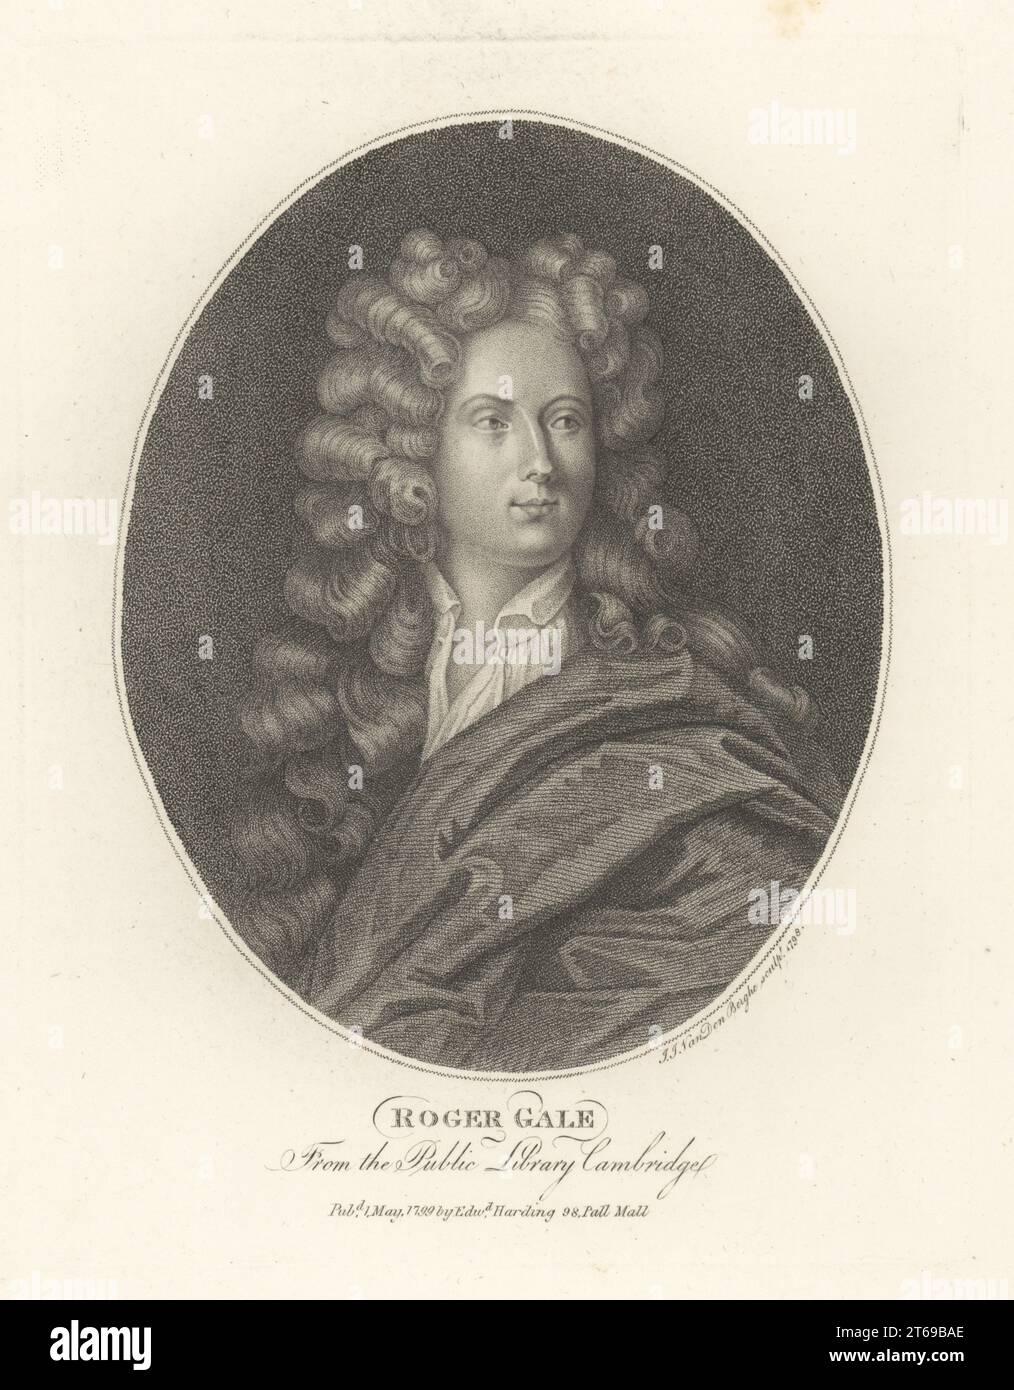 Roger Gale, English antiquary and historian, 1672-1744. Educated at Trinity College, Cambridge, VP of the Society of Antiquaries, Treasurer of the Royal Society. In powdered wig, cloak and linen shirt. Copperplate engraving by Ignatius Joseph van den Berghe from John Adolphus The British Cabinet, containing Portraits of Illustrious Personages, printed by T. Bensley for E. Harding, 98 Pall Mall, London, 1800. Stock Photo